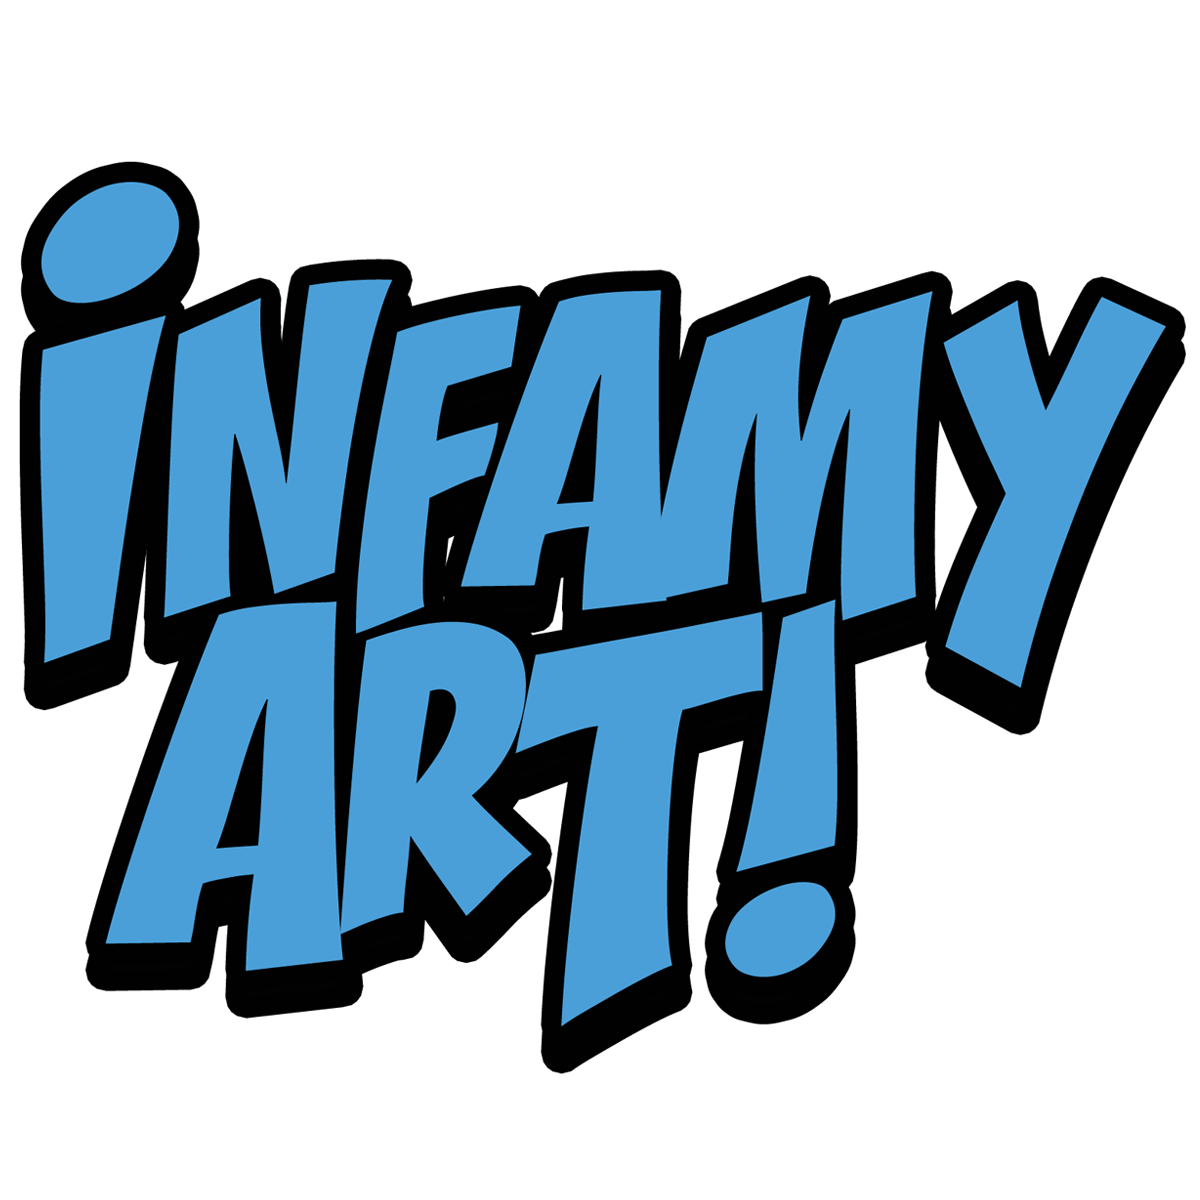 Welcome to Infamy Art